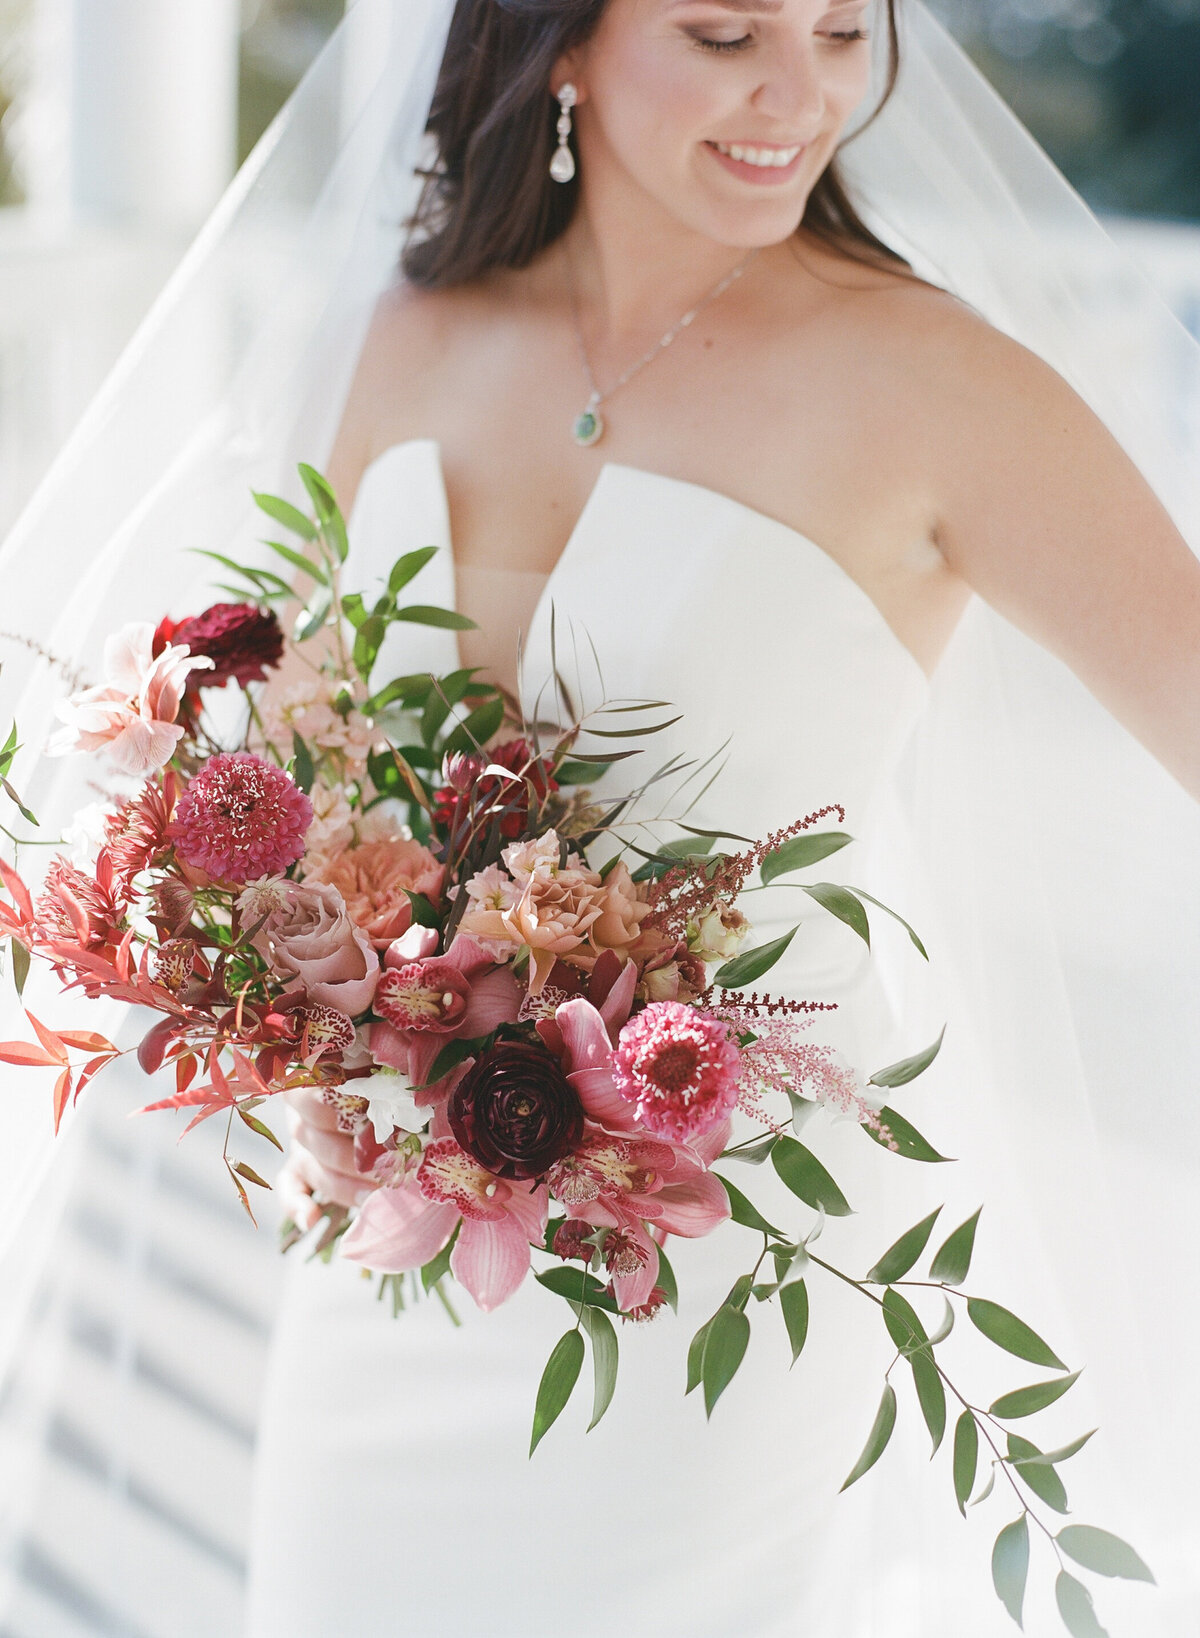 Hannah + George | Wedding at Lowndes Grove by Pure Luxe Bride: Charleston Wedding and Event Planners